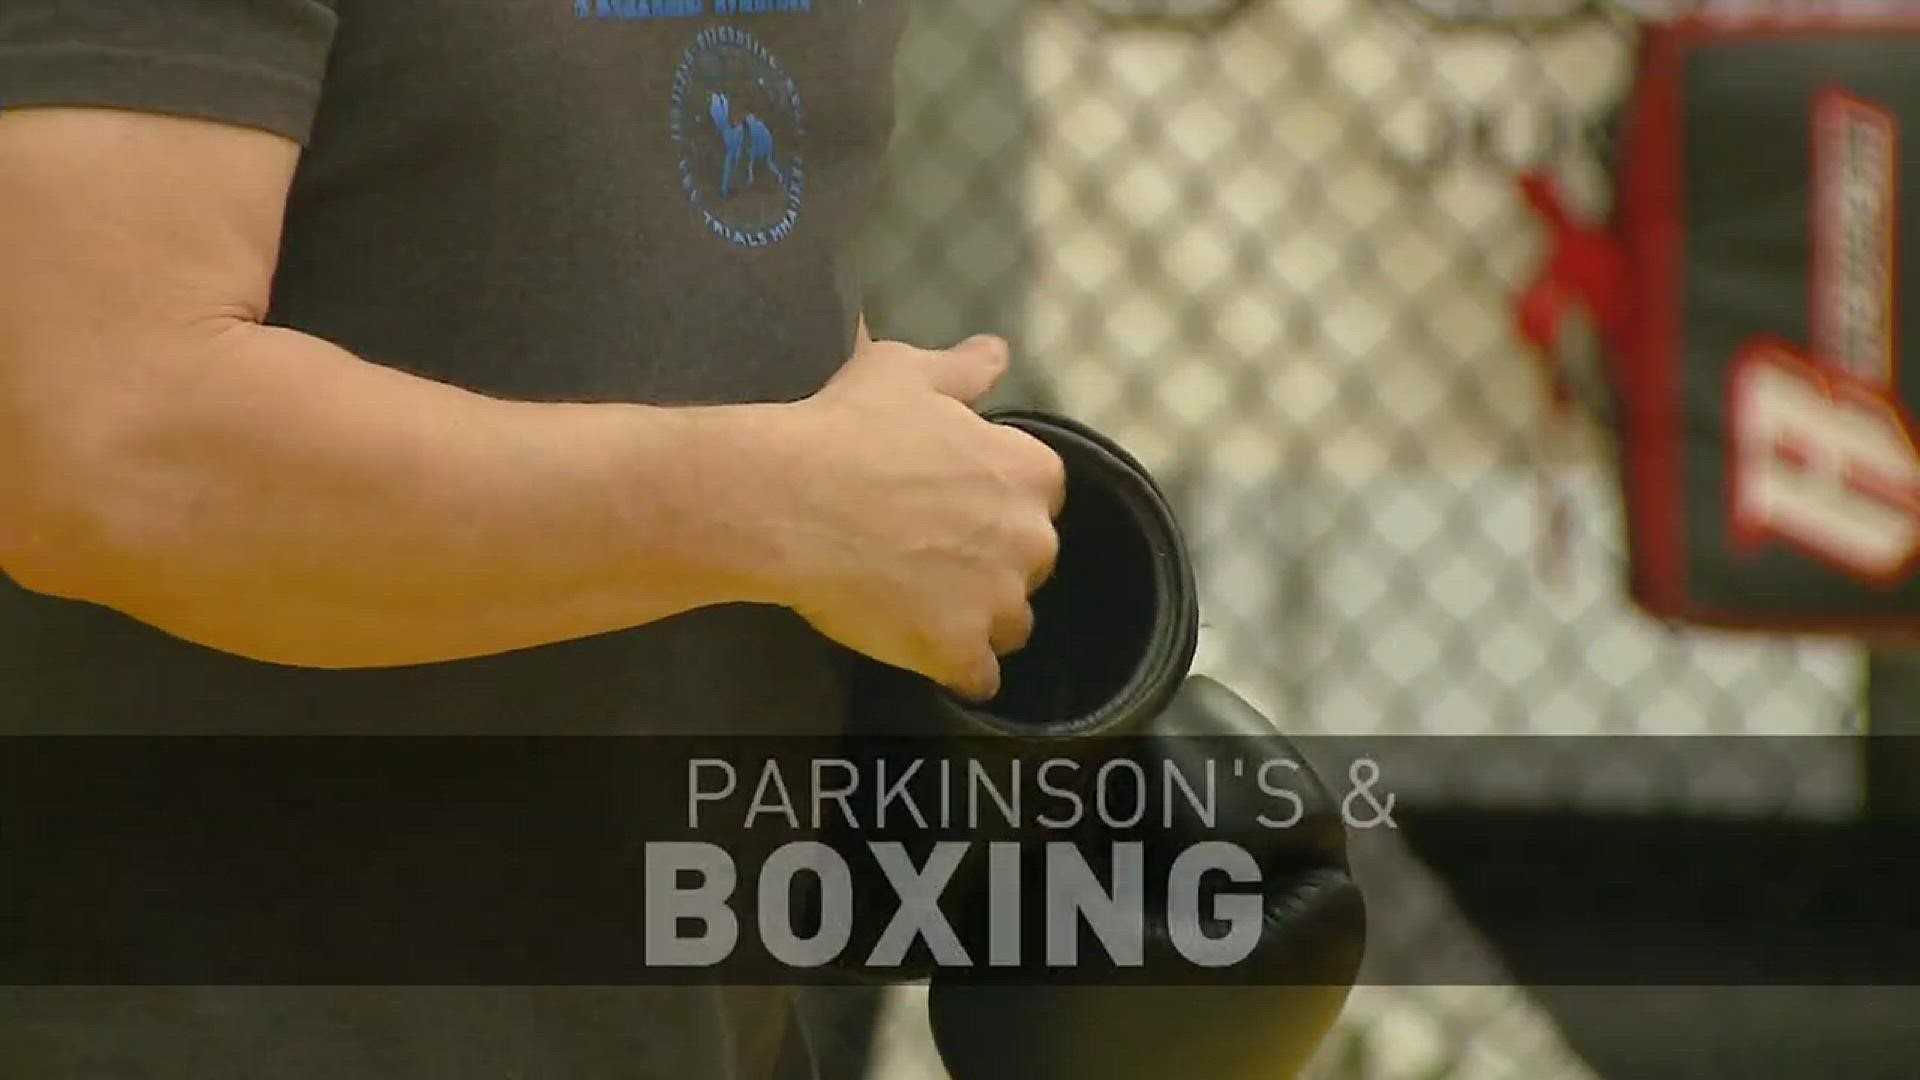 Meet a man who's using boxing to help fight Parkinson's Disease and meet a woman who specializes in posting food photos to Instagram for our staff picks for Thursday, Feb. 28.